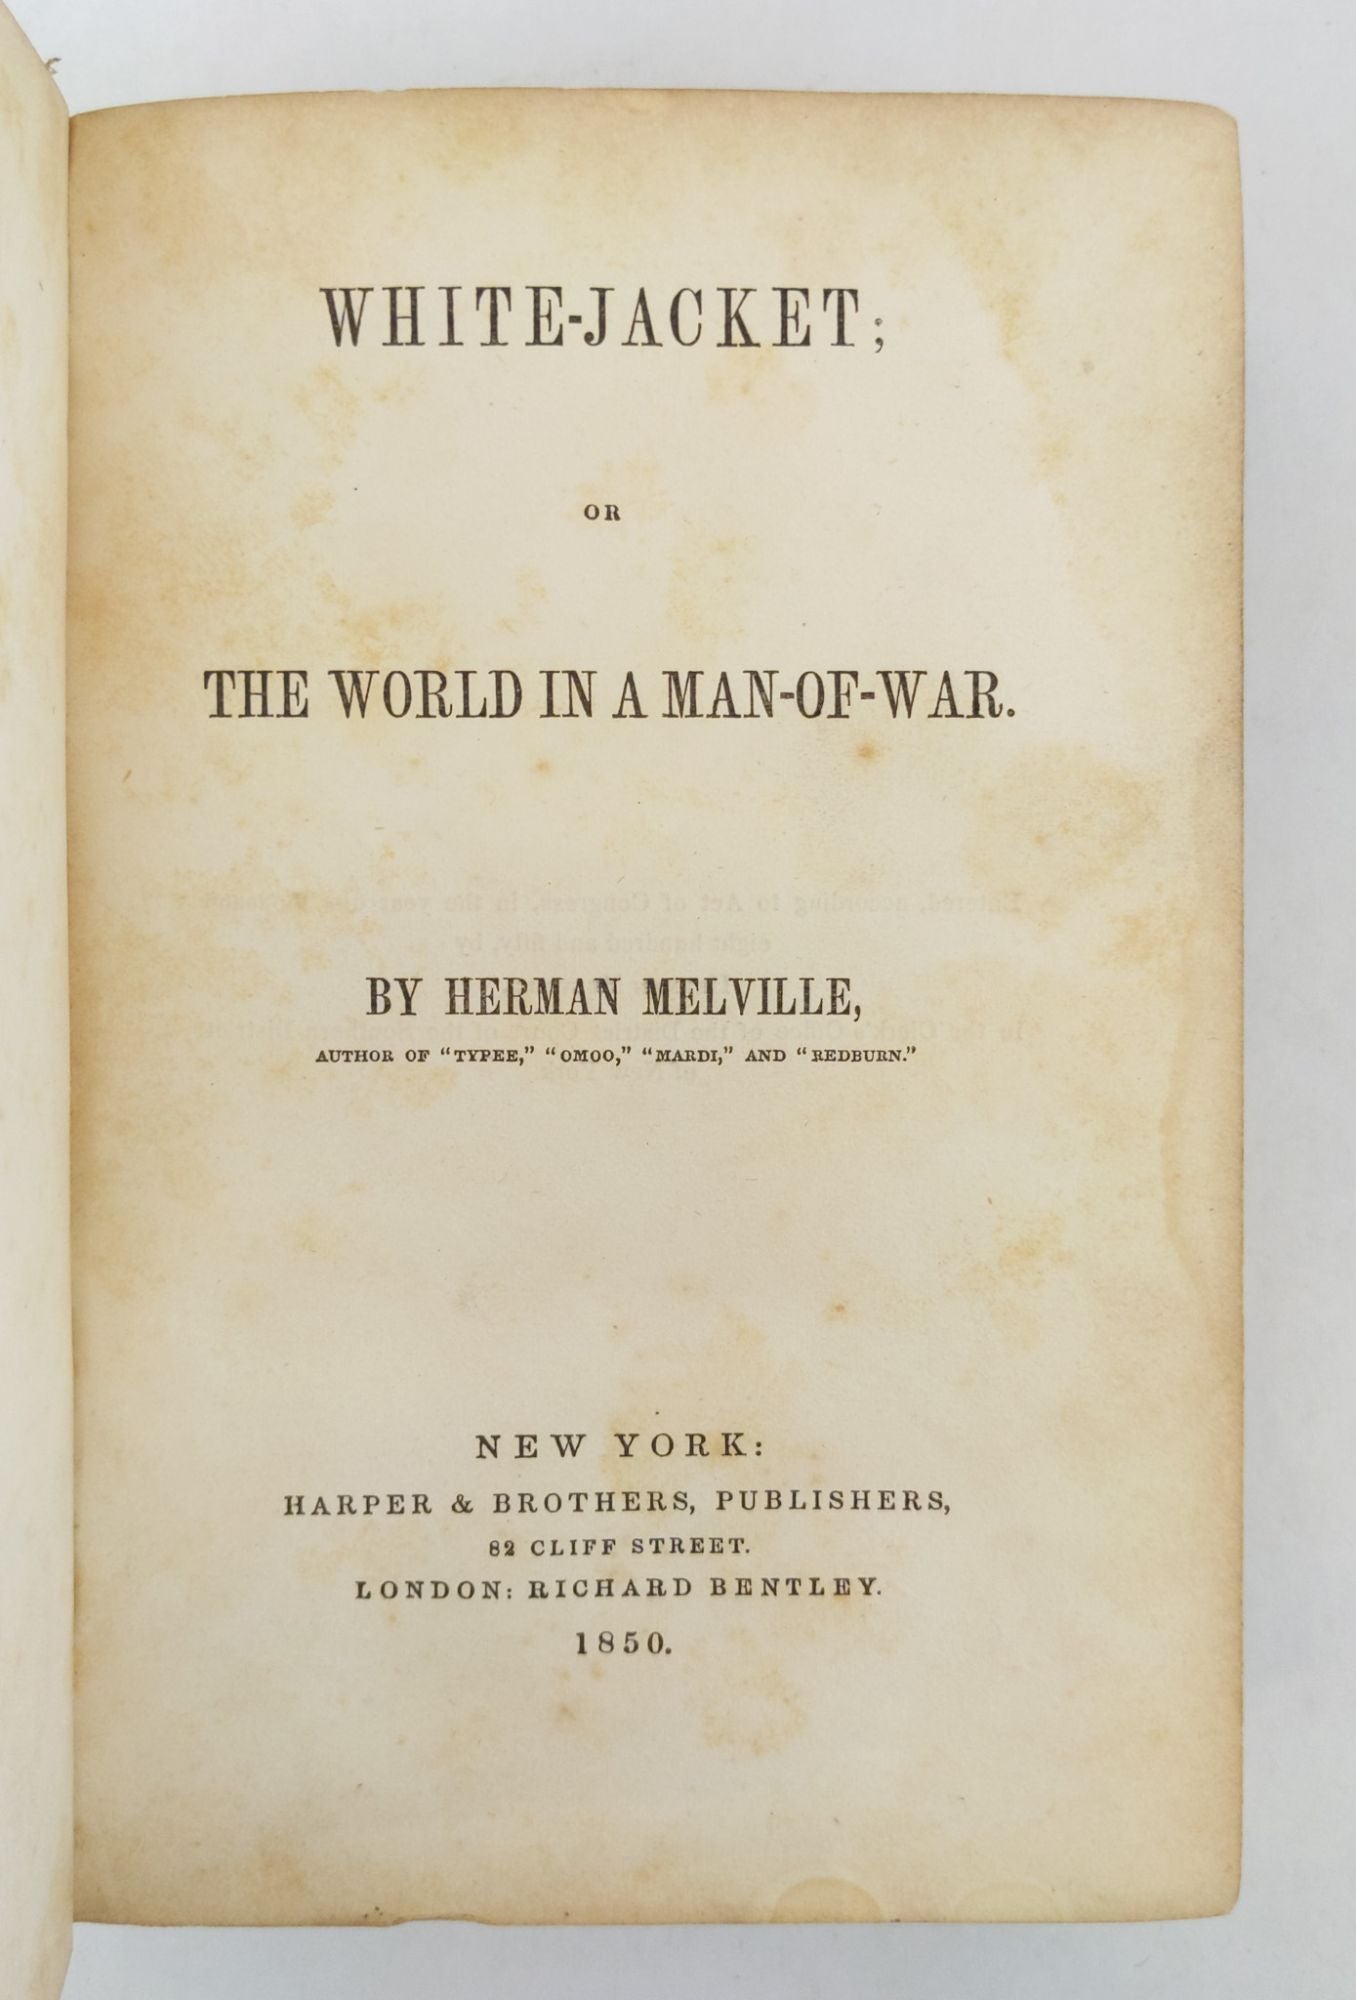 Product Image for WHITE-JACKET; OR THE WORLD IN A MAN-OF-WAR